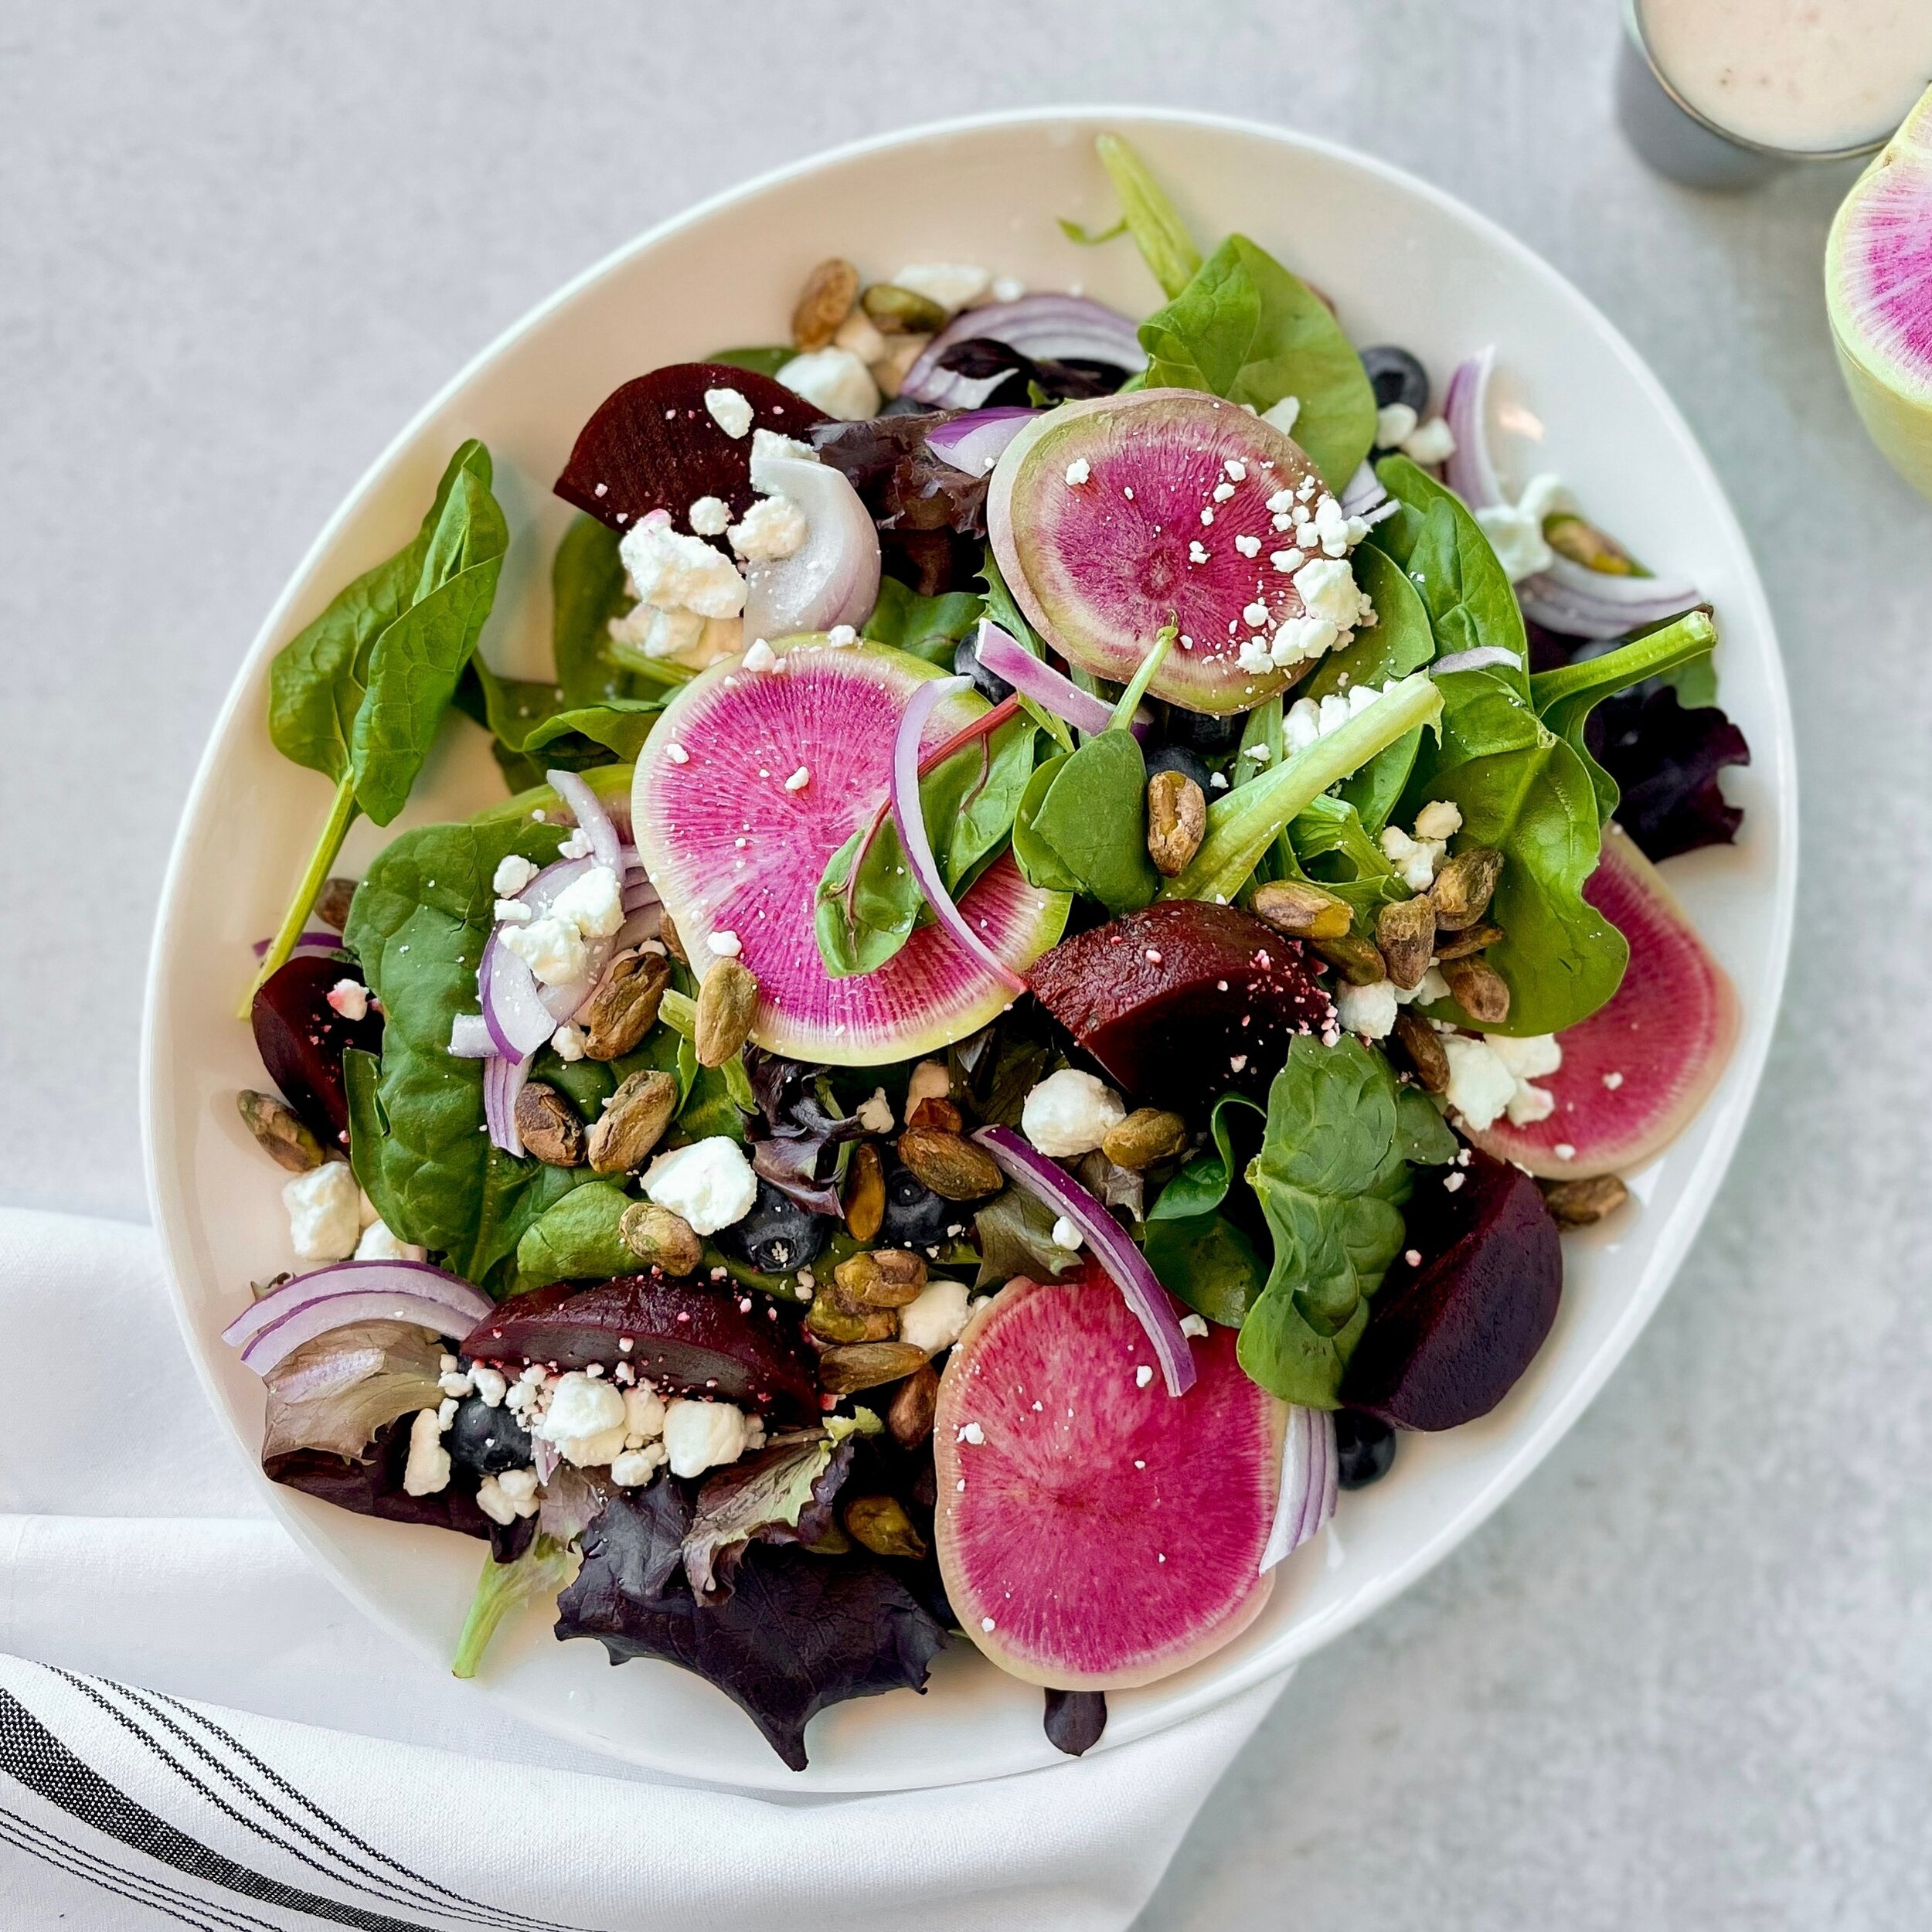 Get your taste buds buzzing with this vibrant Blueberry and Beet salad at Wedge Parkway! 🫐🥗 It&rsquo;s a berry-licious explosion of flavors with fresh baby greens with roasted beets, fresh blueberries, shaved red onion, watermelon radishes, crumble